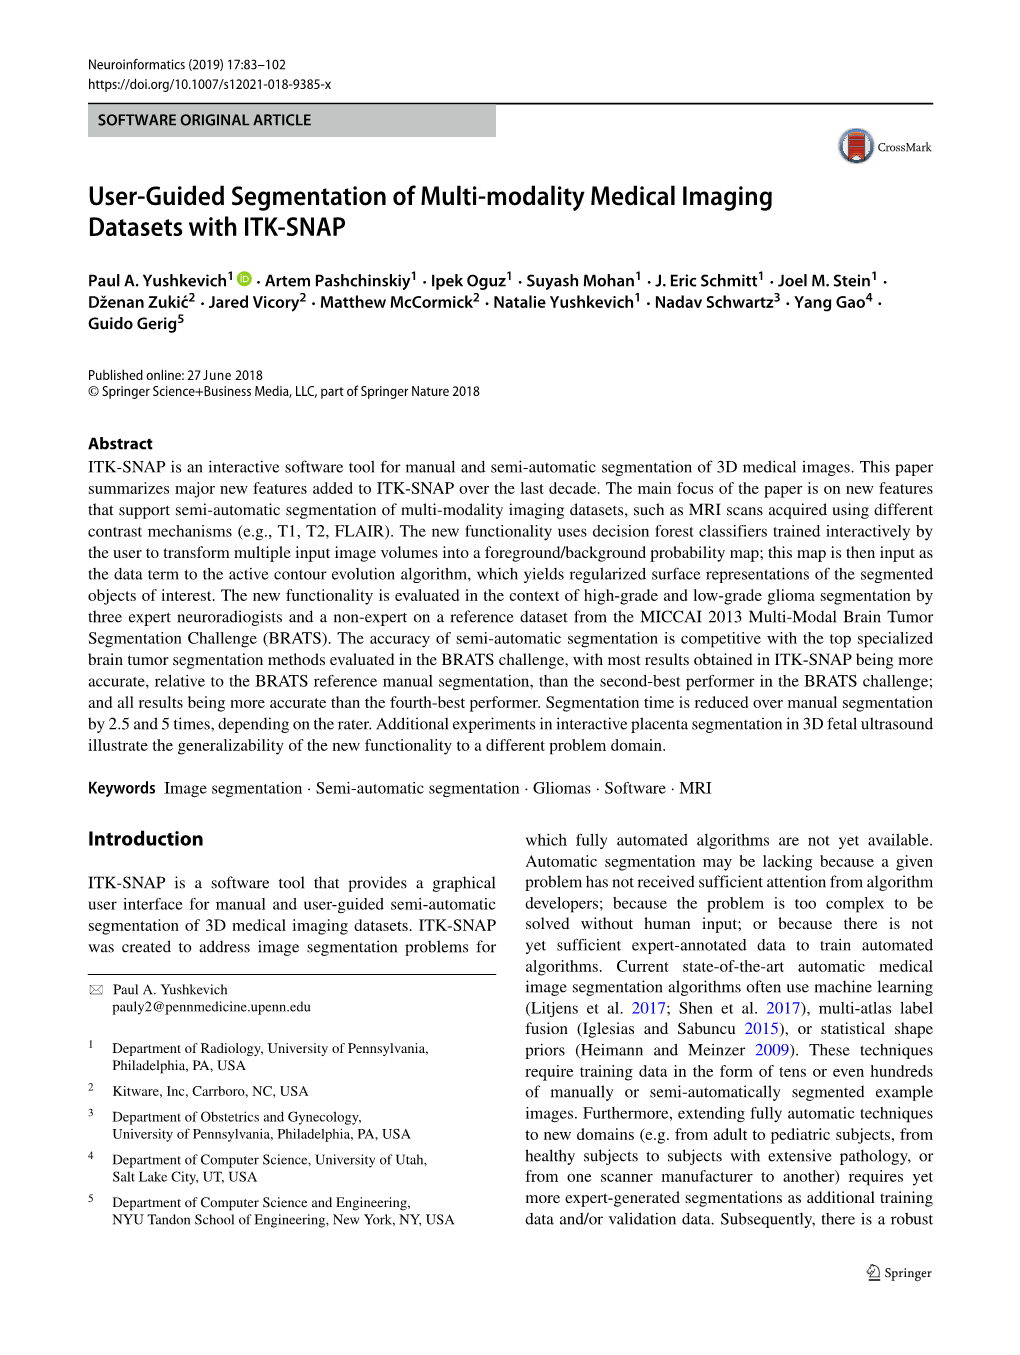 User-Guided Segmentation of Multi-Modality Medical Imaging Datasets with ITK-SNAP